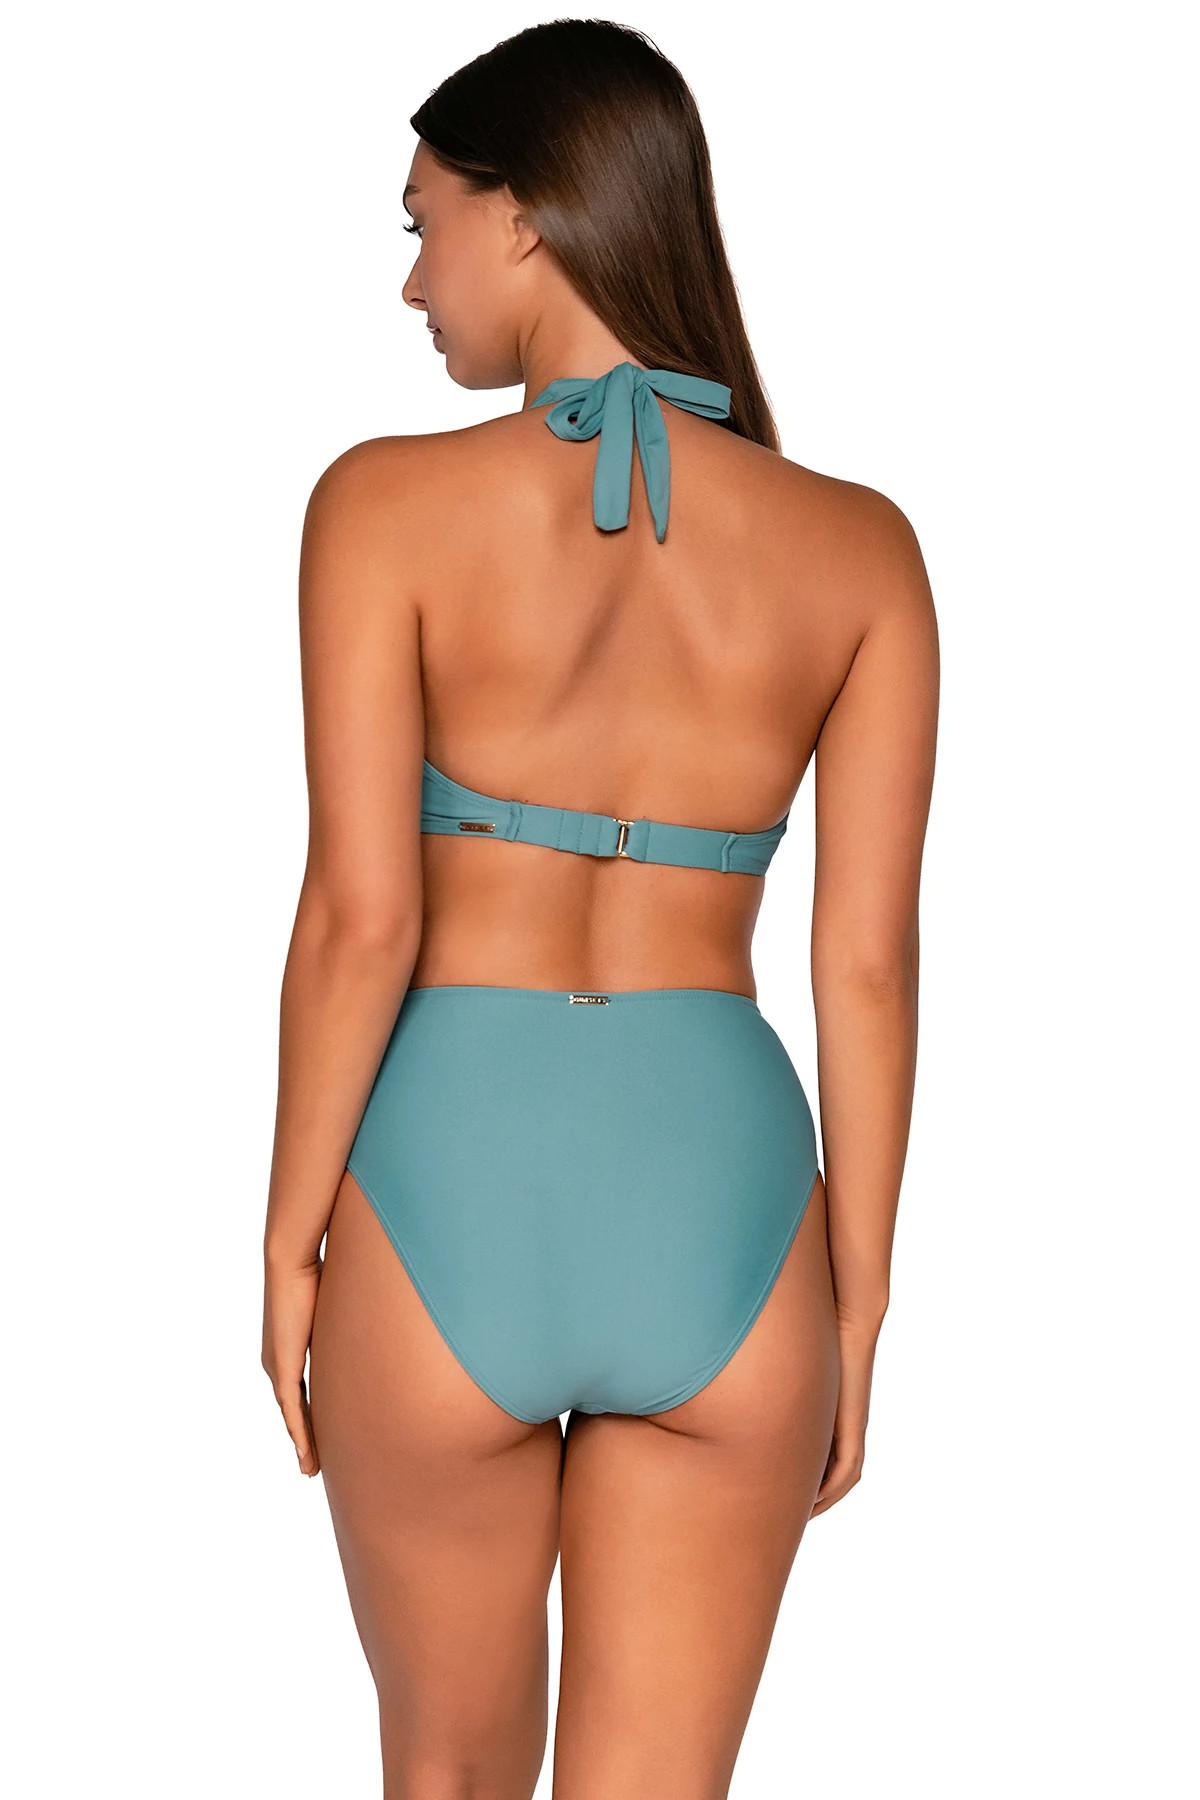 OCEAN Muse Underwire Halter Bikini Top (E-H Cup) image number 3